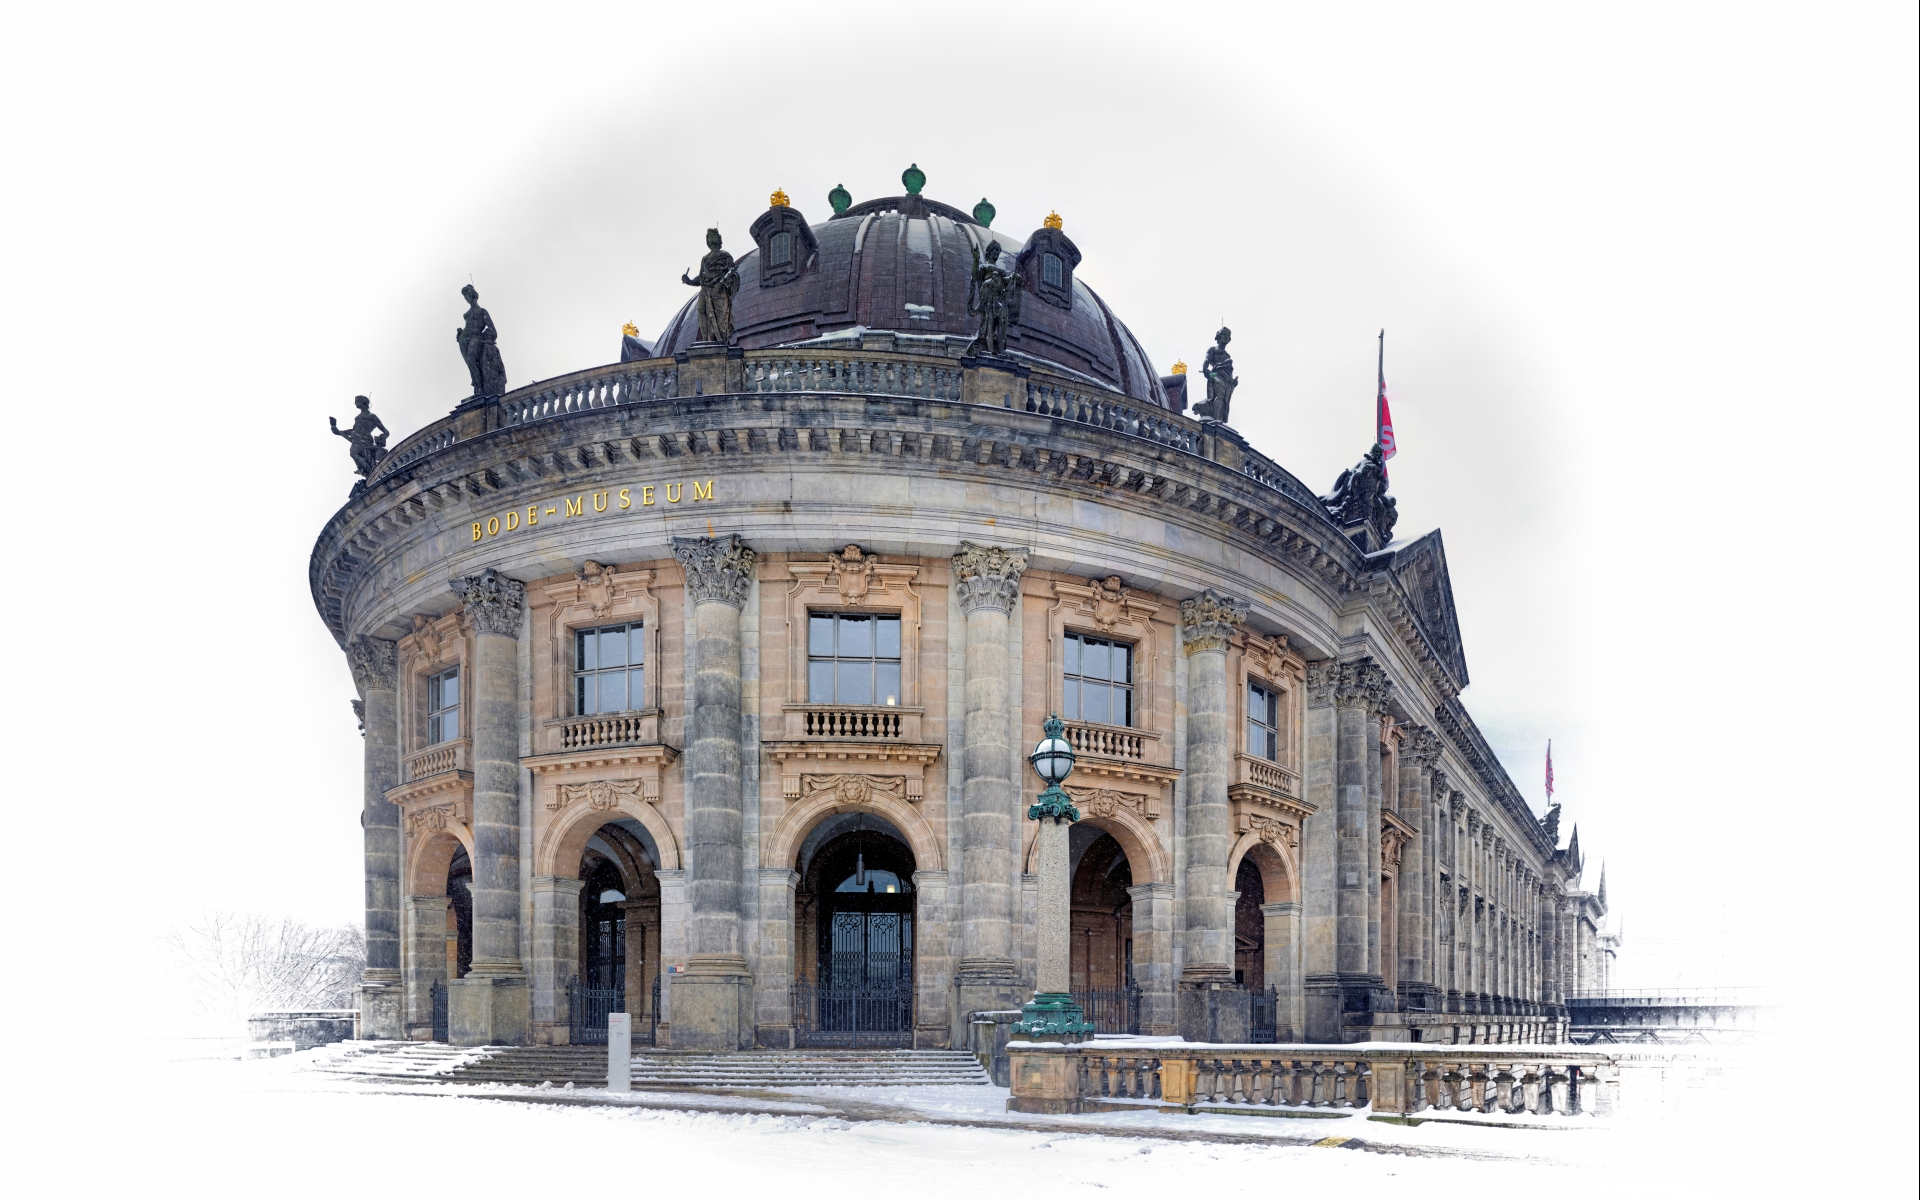 Man Made Bode Museum HD Wallpaper | Background Image